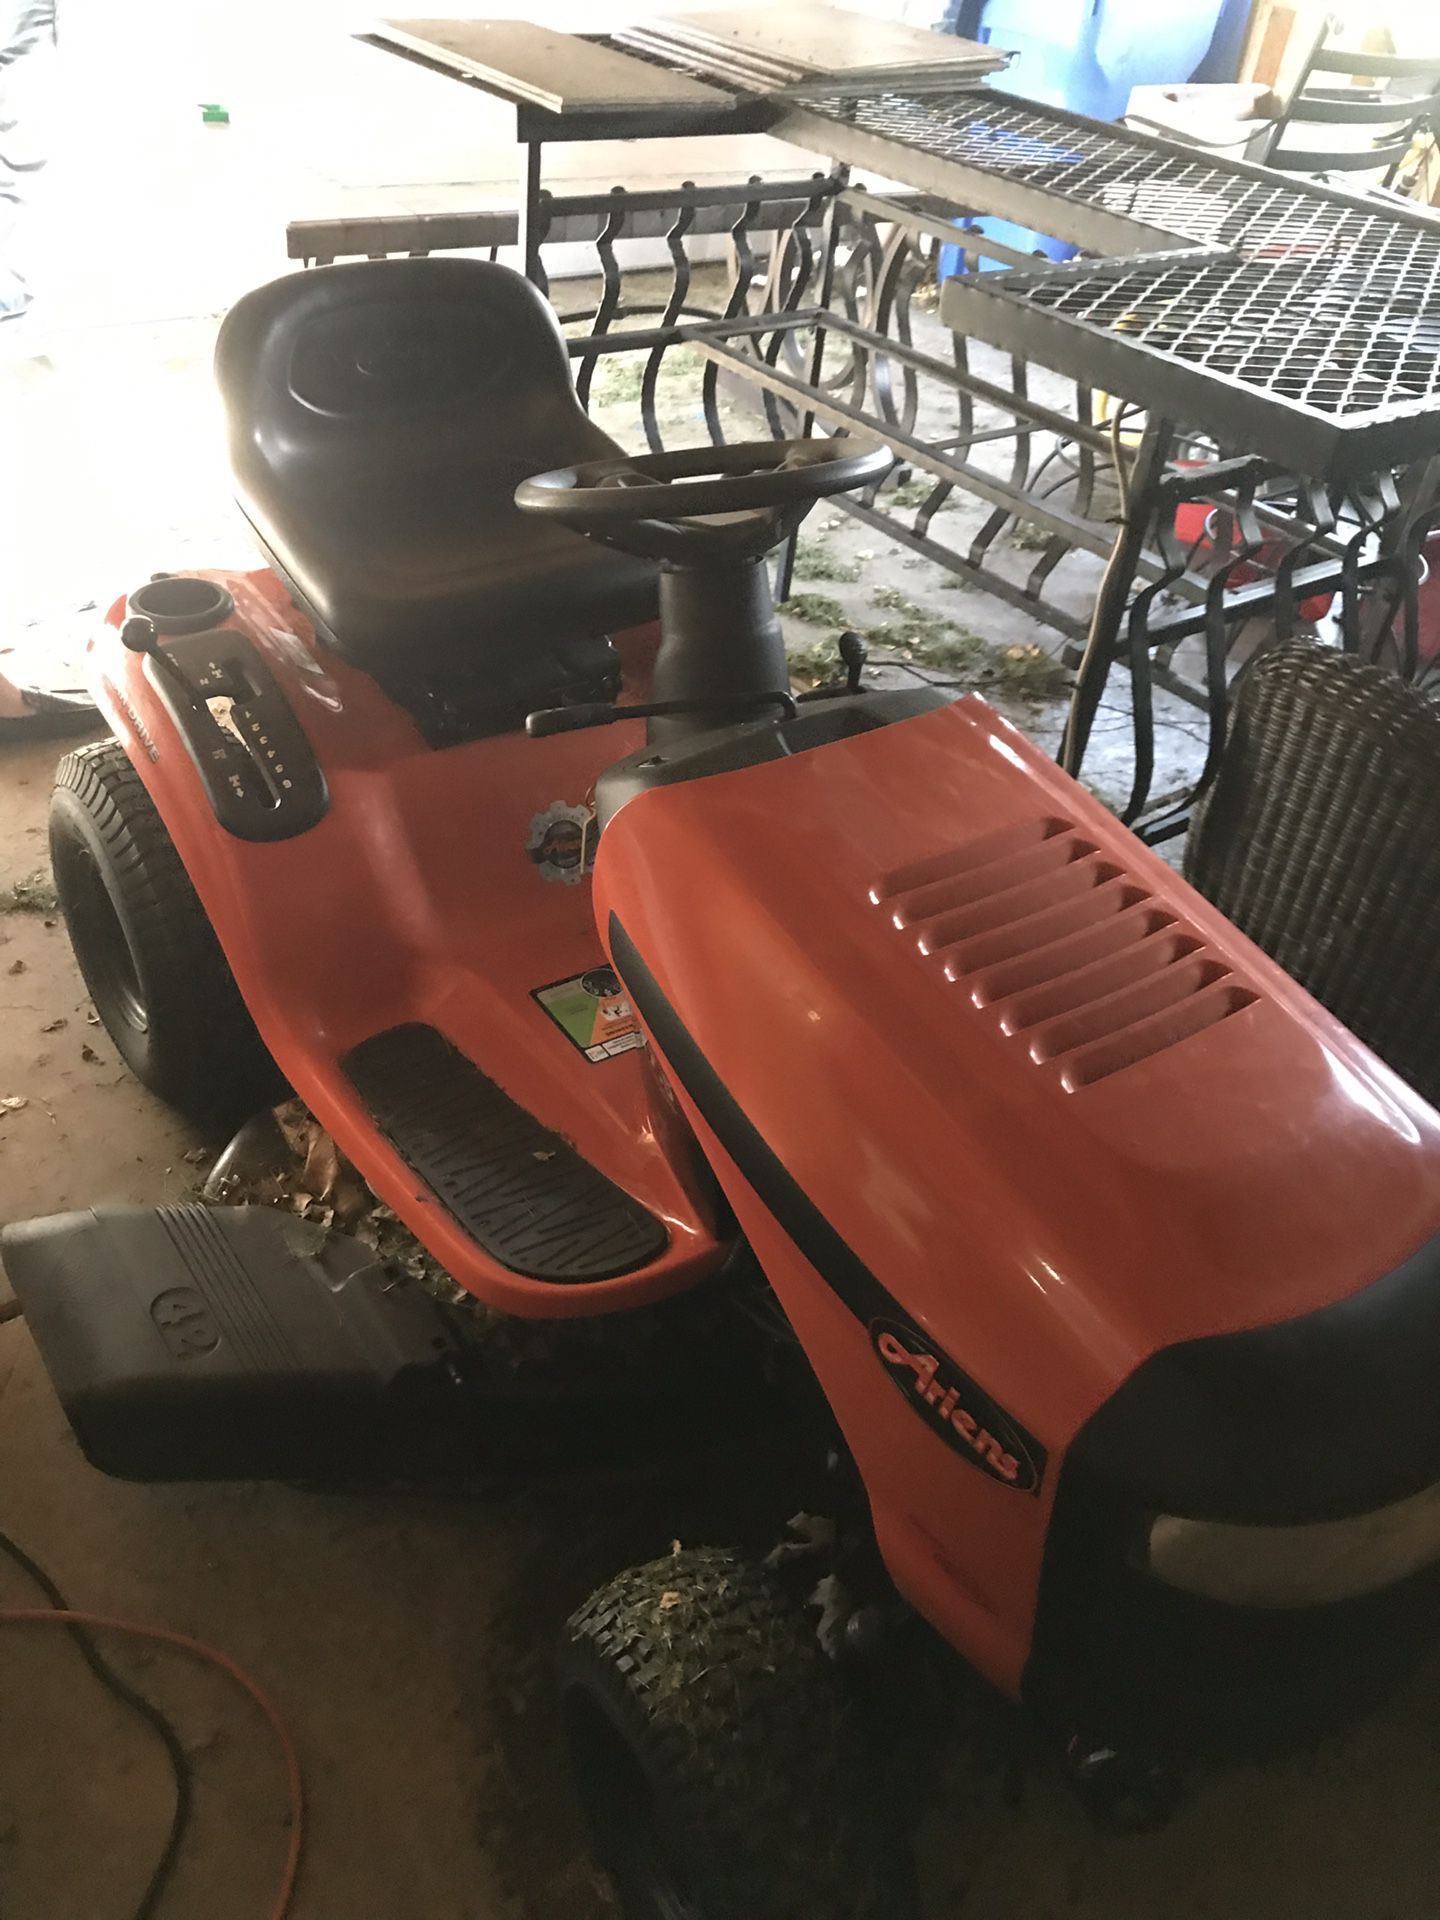 Riding lawn mower. Rarely used.